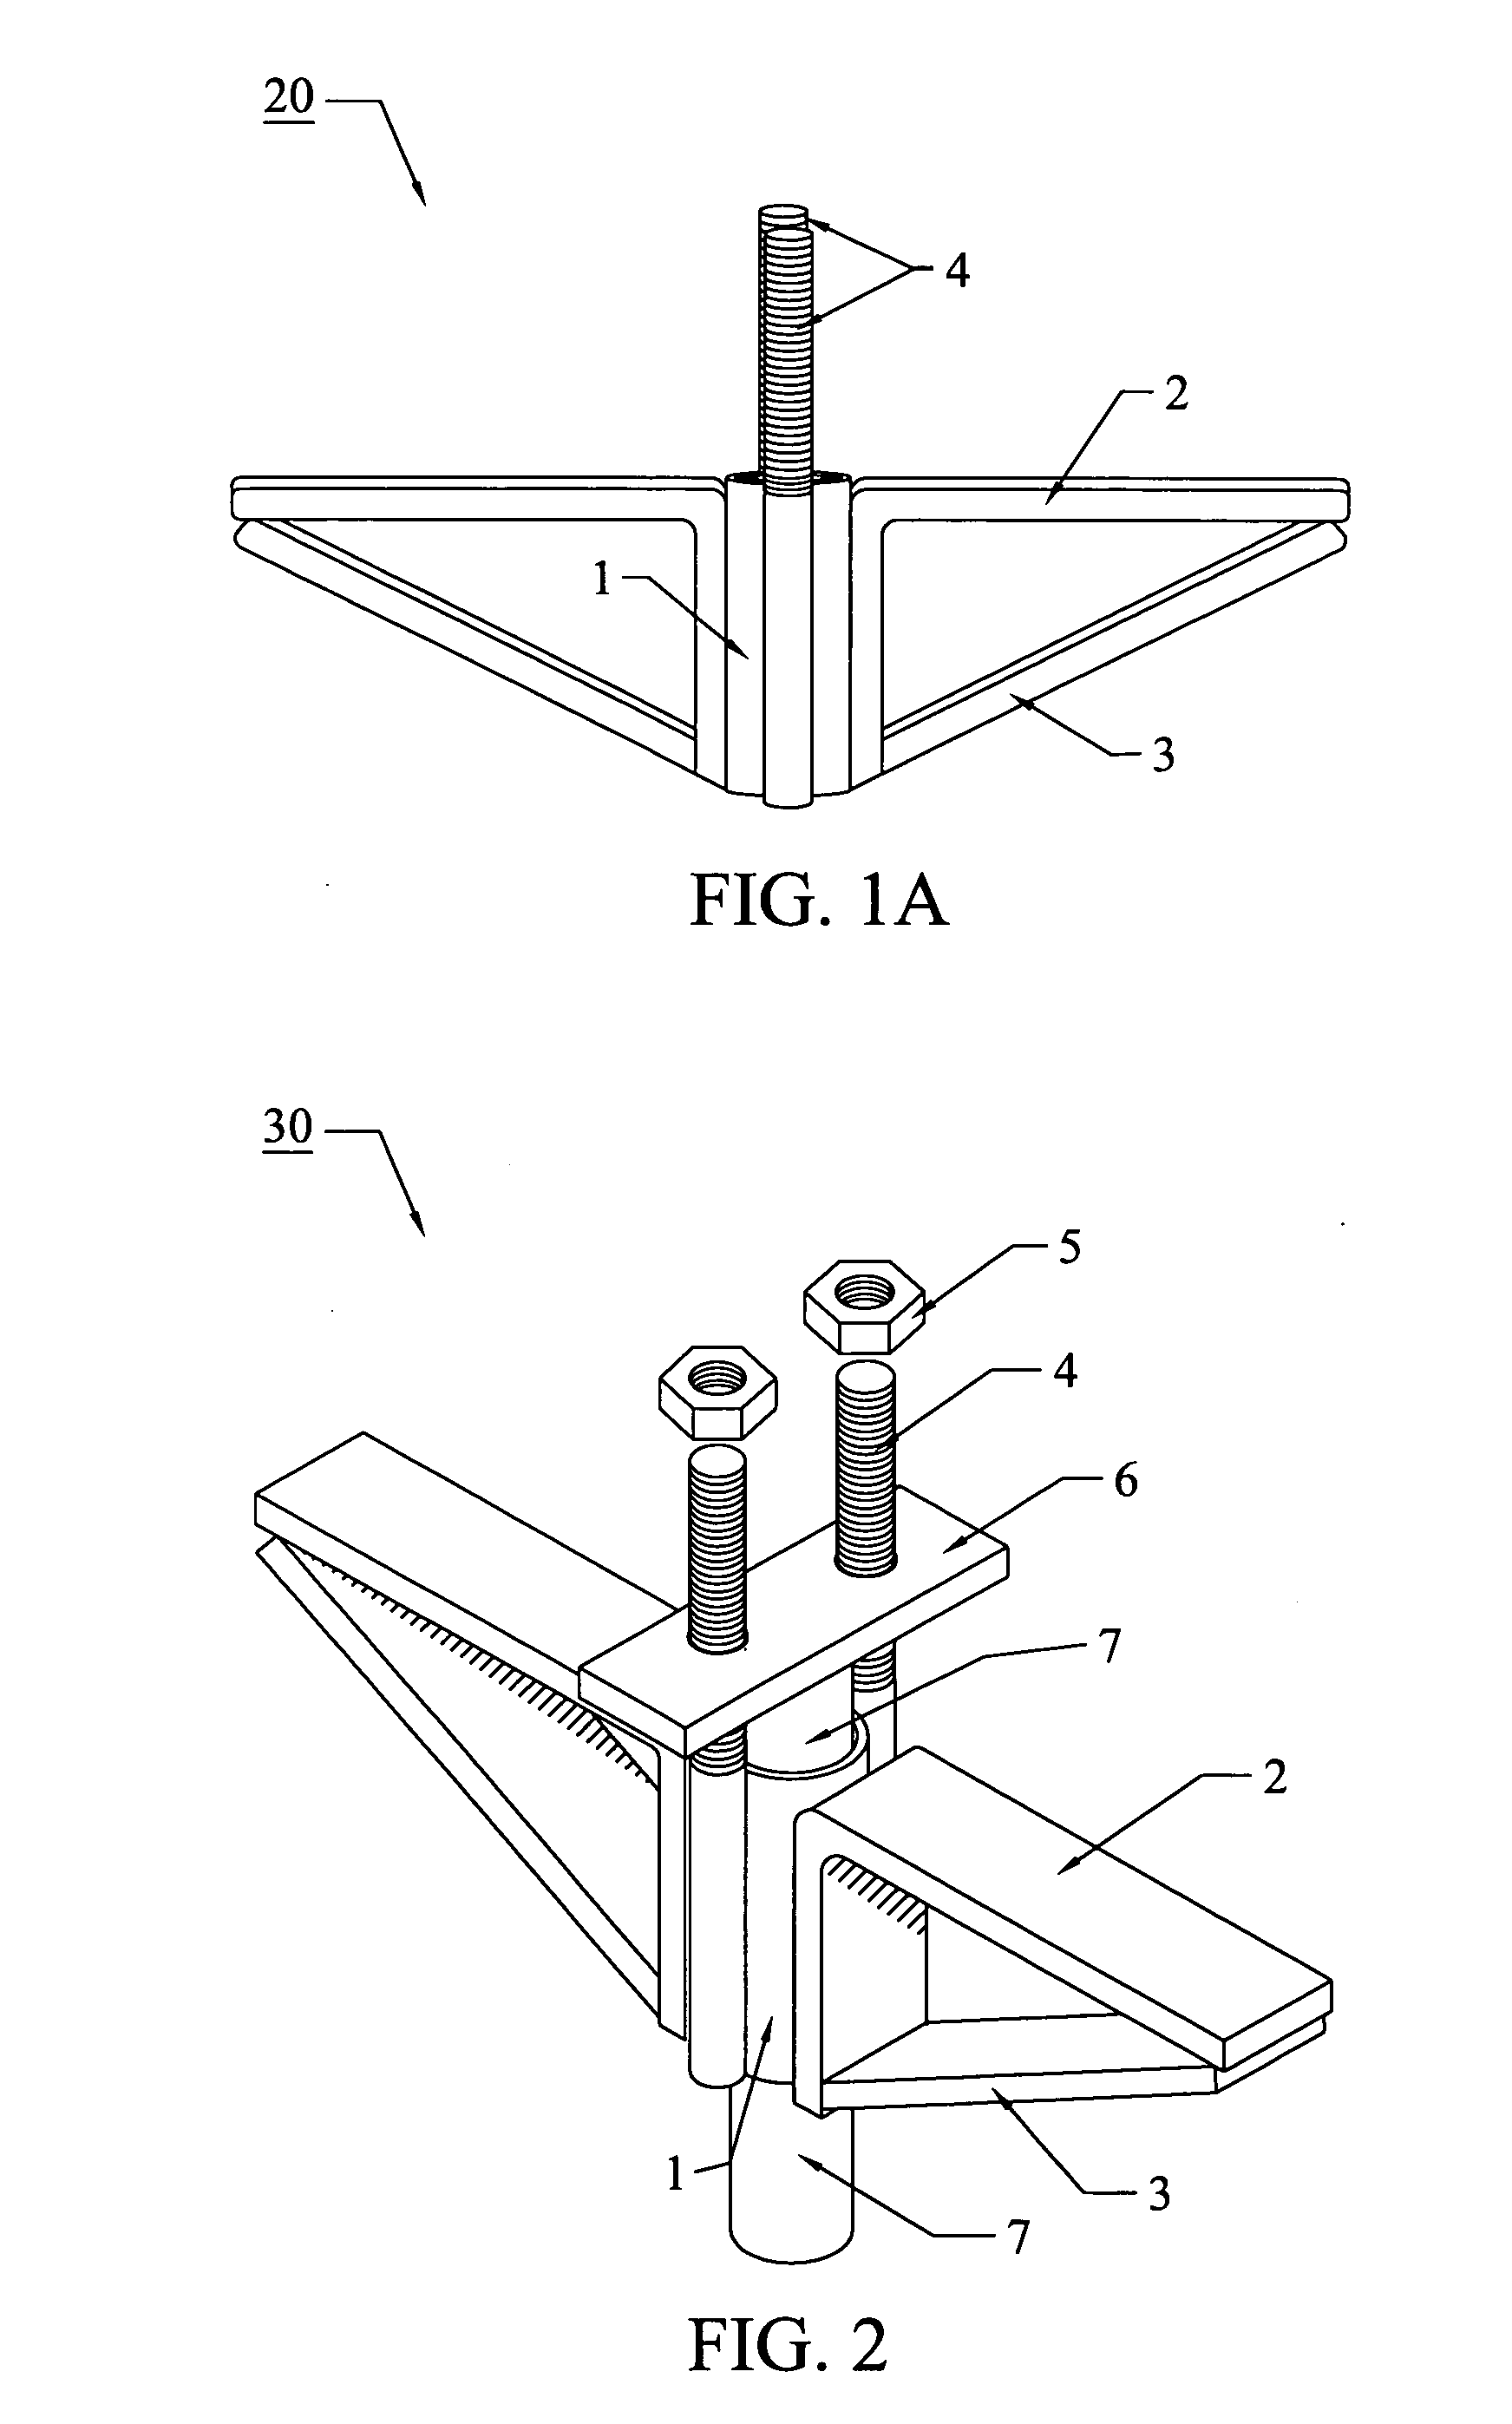 Method and apparatus for lifting and stabilizing subsided slabs, flatwork and foundations of buildings